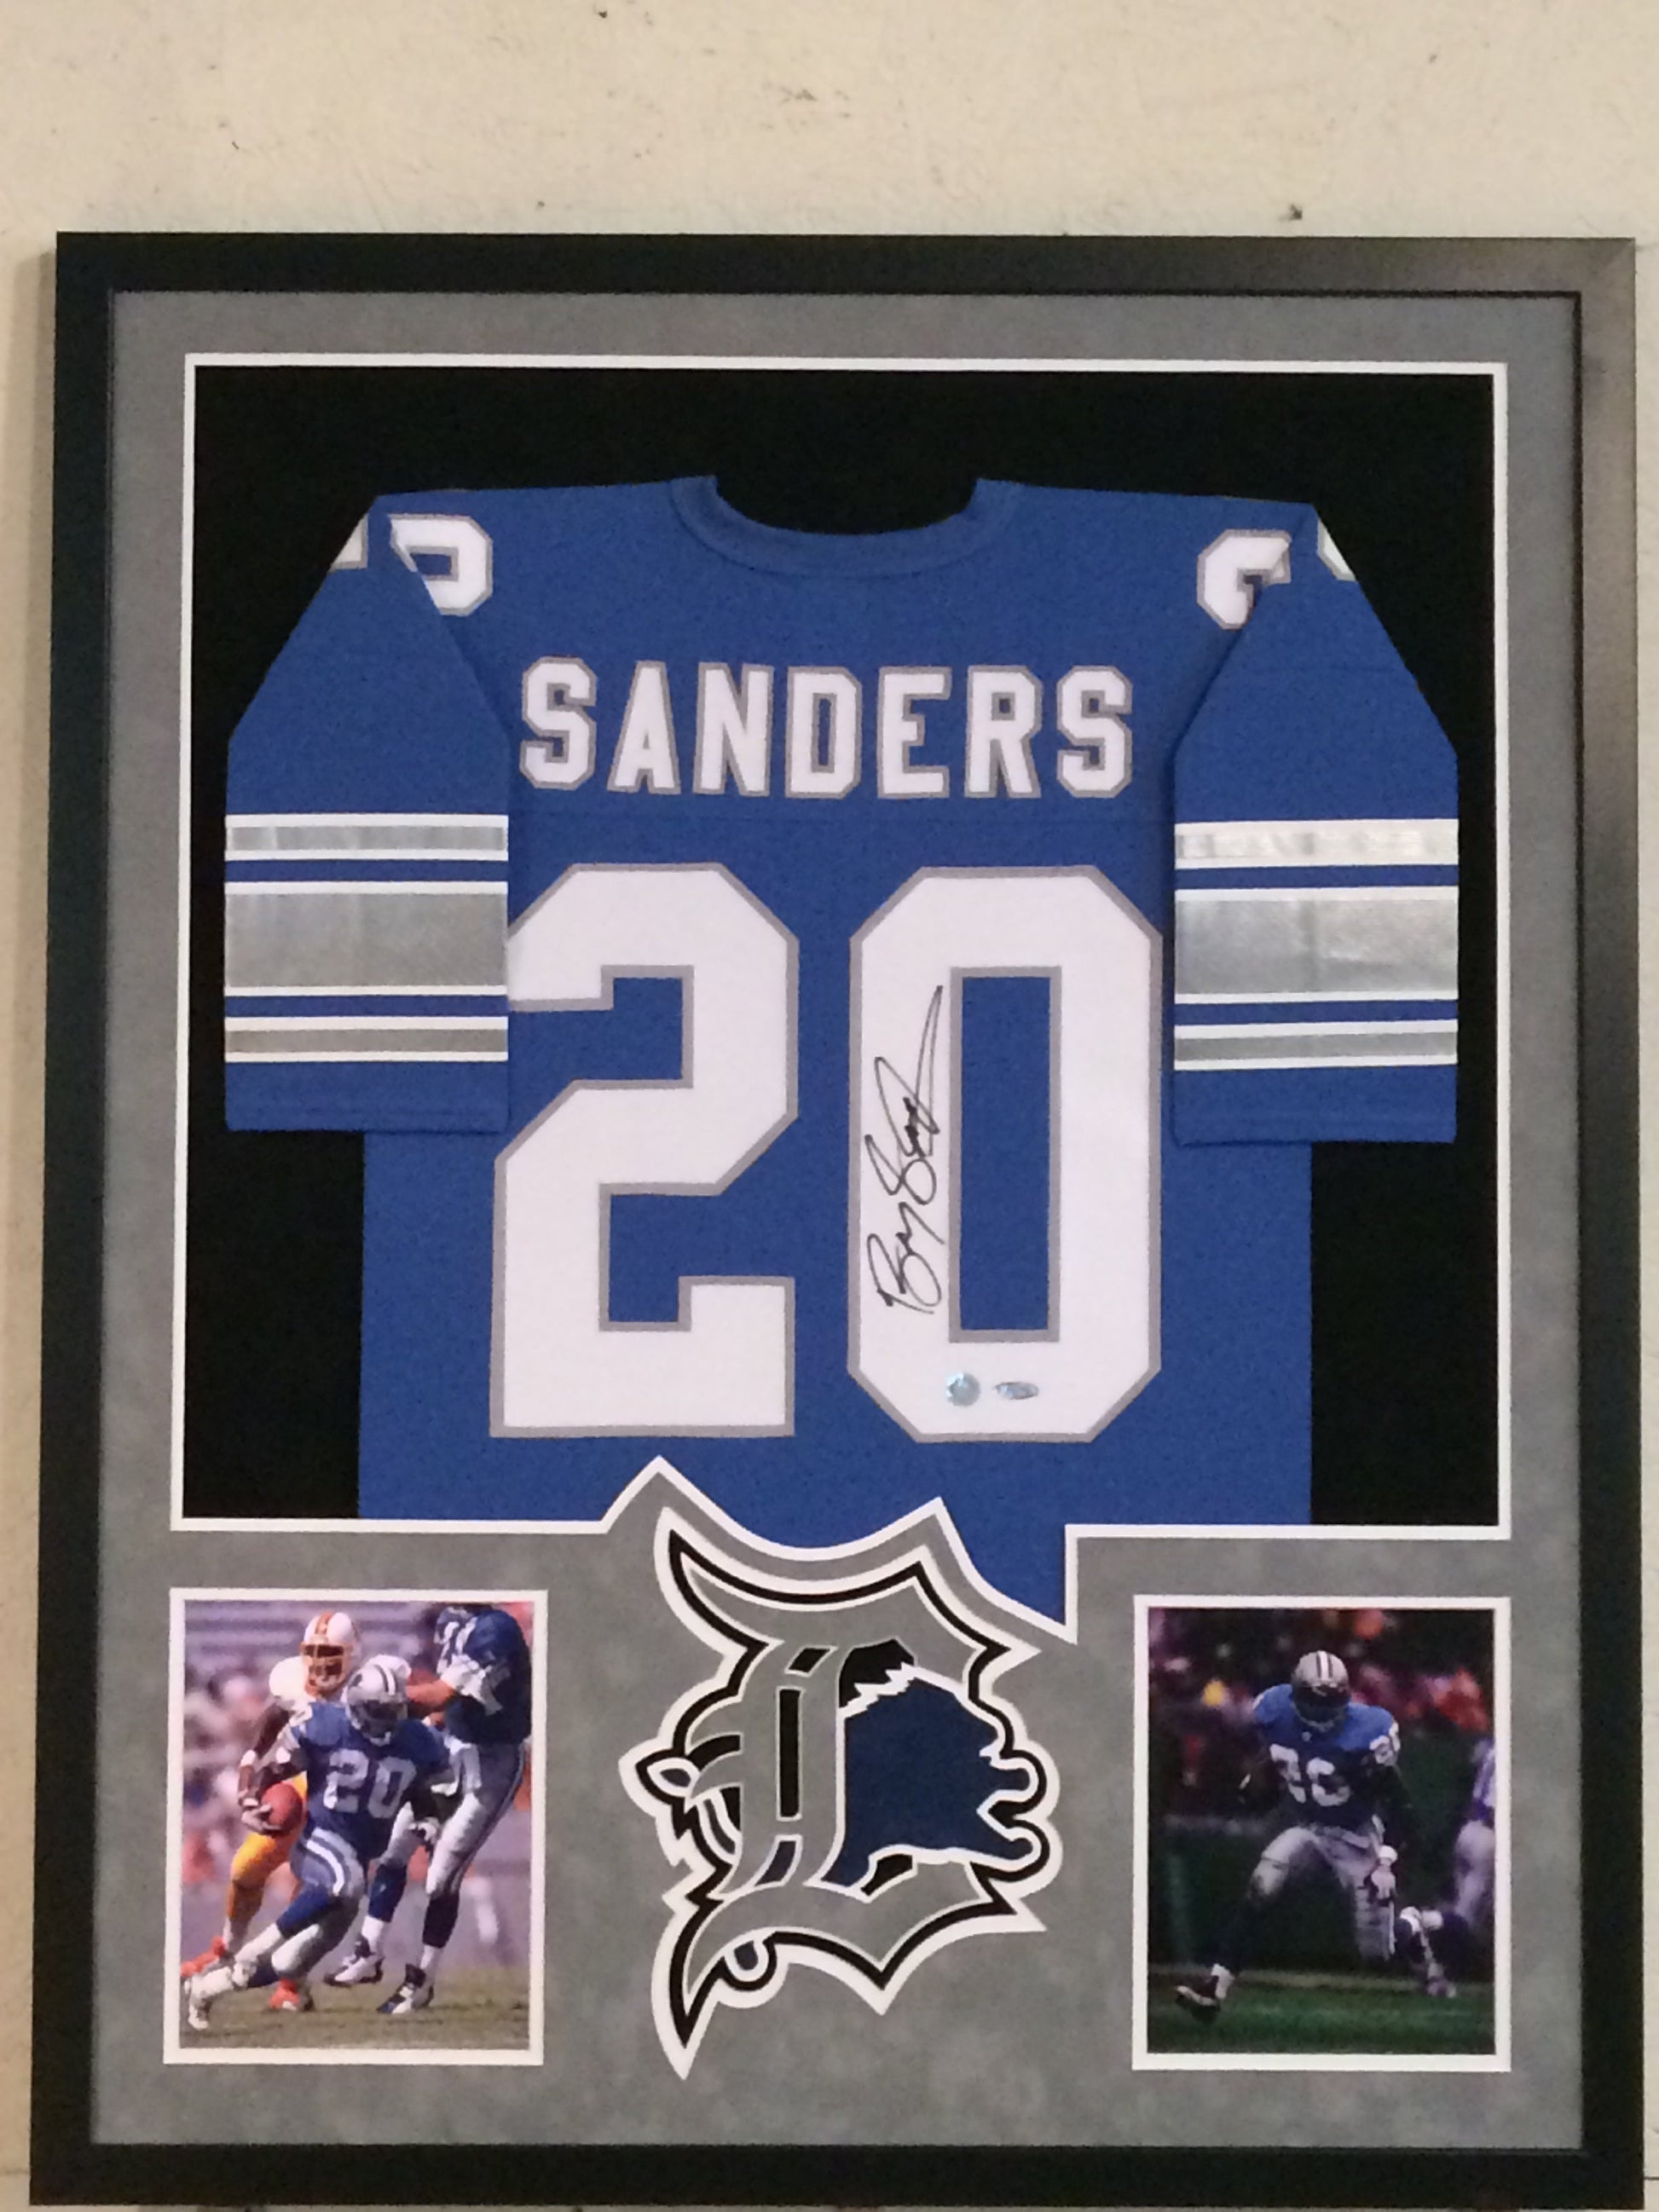 MVP Authentics - Framing Custom Framing - 2 photo vertical layout with suede matting 225 sports jersey framing , jersey framing